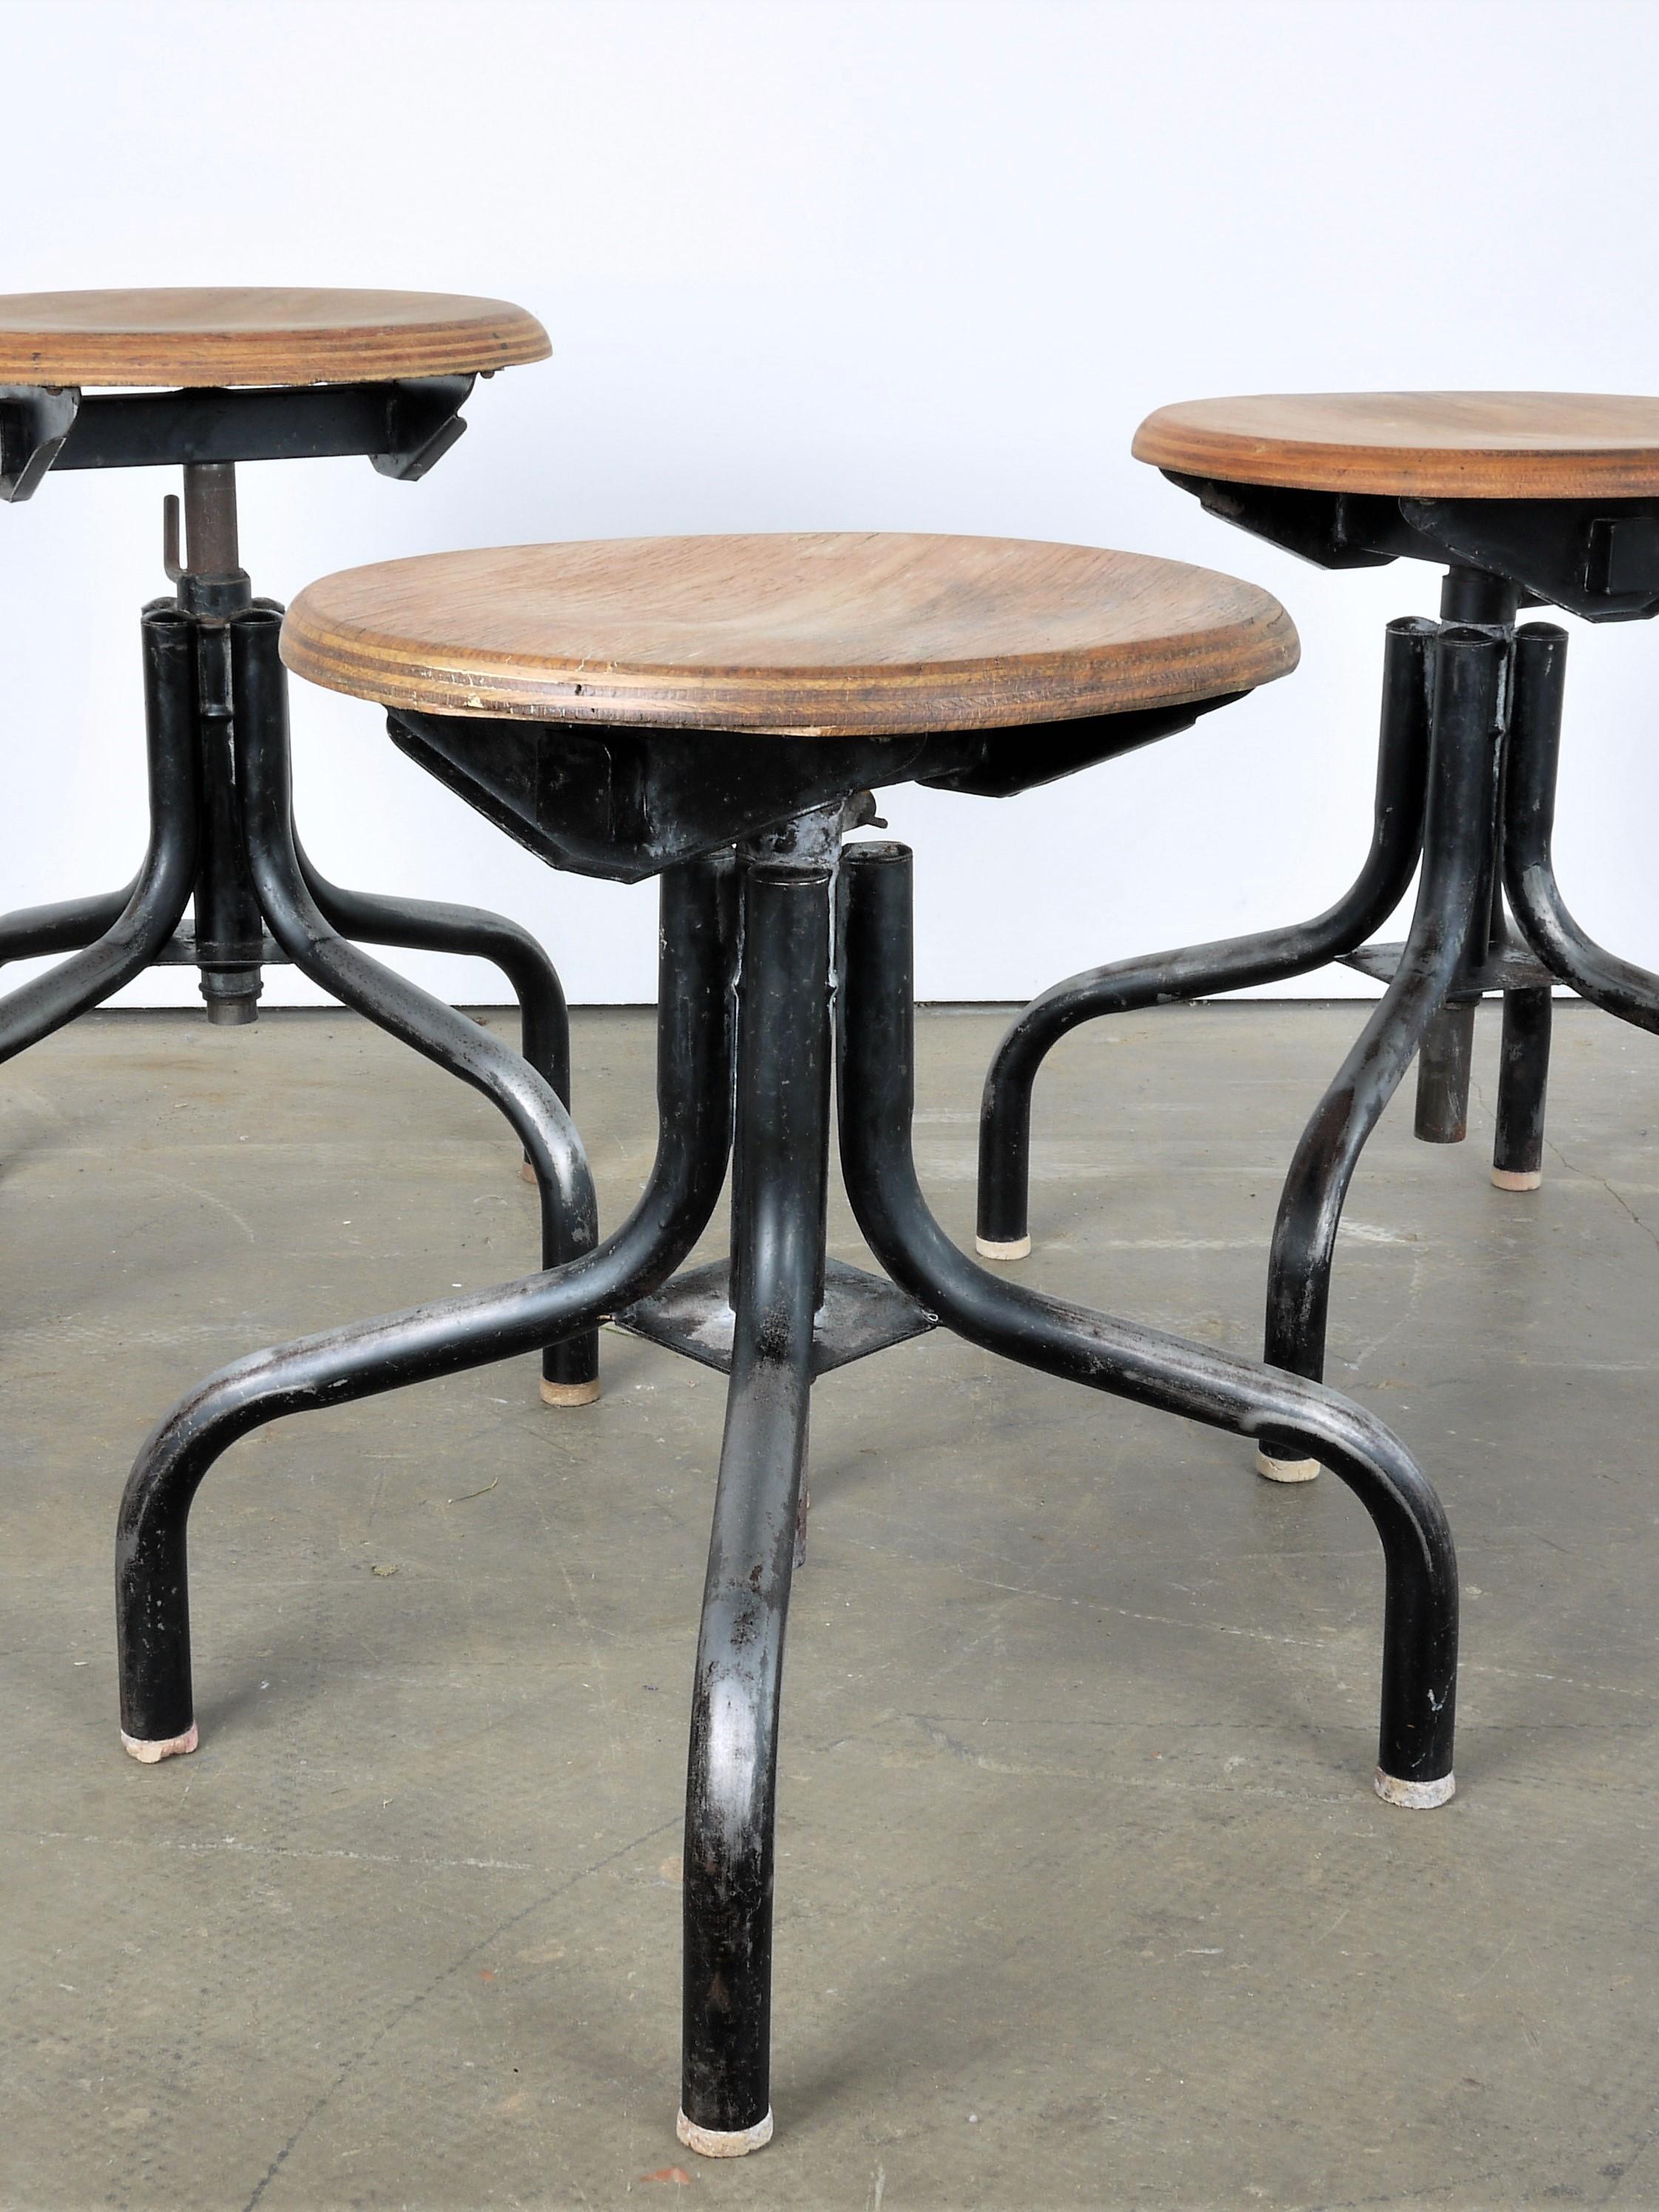 1950s French set of three low industrial/machinists stools
1950s French set of three vintage low industrial/machinists stools. Lovely honest set of three French stools with height adjustable and swiveling seat. Seats are solid laminated Beech.